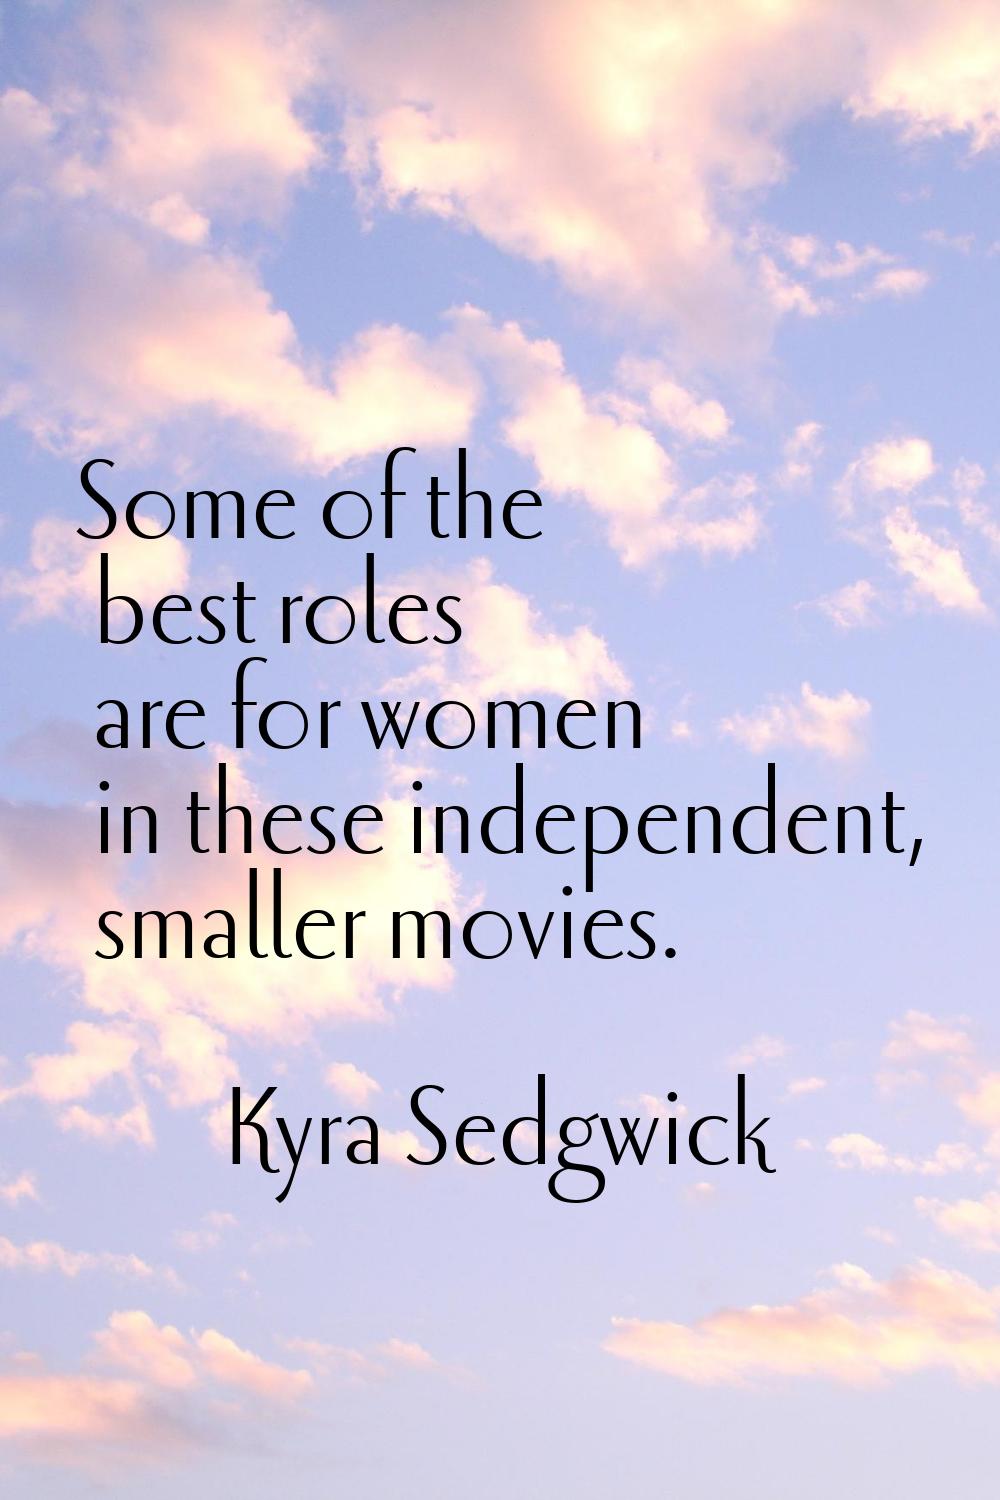 Some of the best roles are for women in these independent, smaller movies.